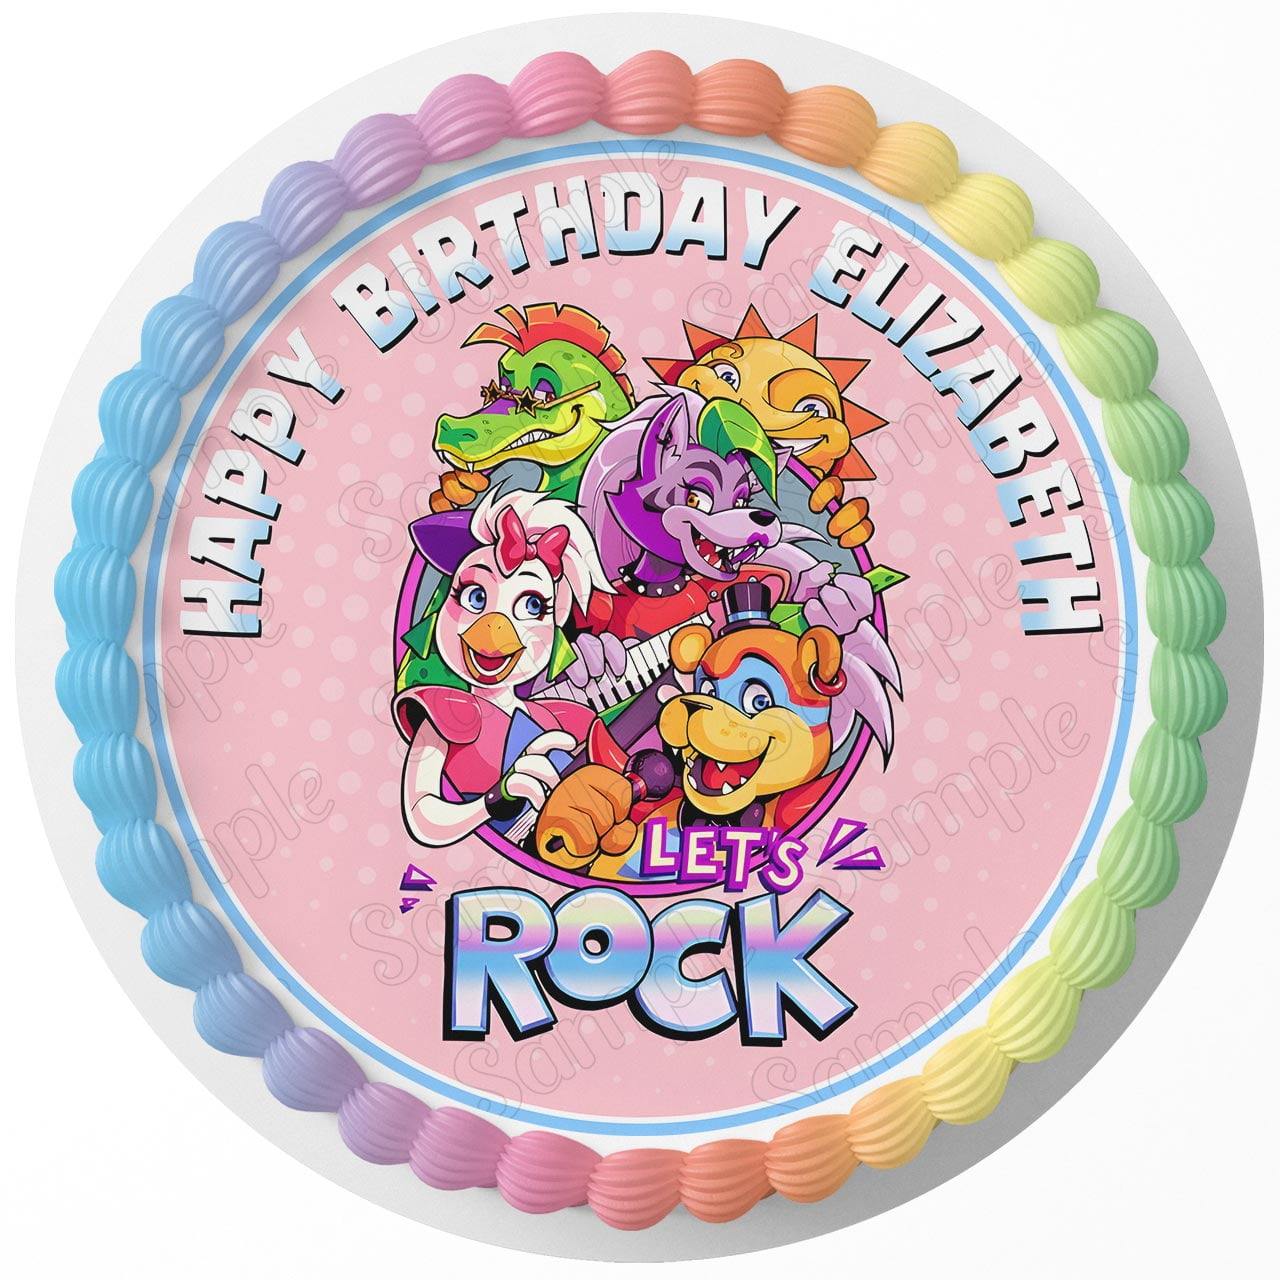 Lets ROCK Security Breach FNaF Rd Edible Cake Image Topper Birthday Photo  Icing Fondant Decoration Print 8 Inch Round 